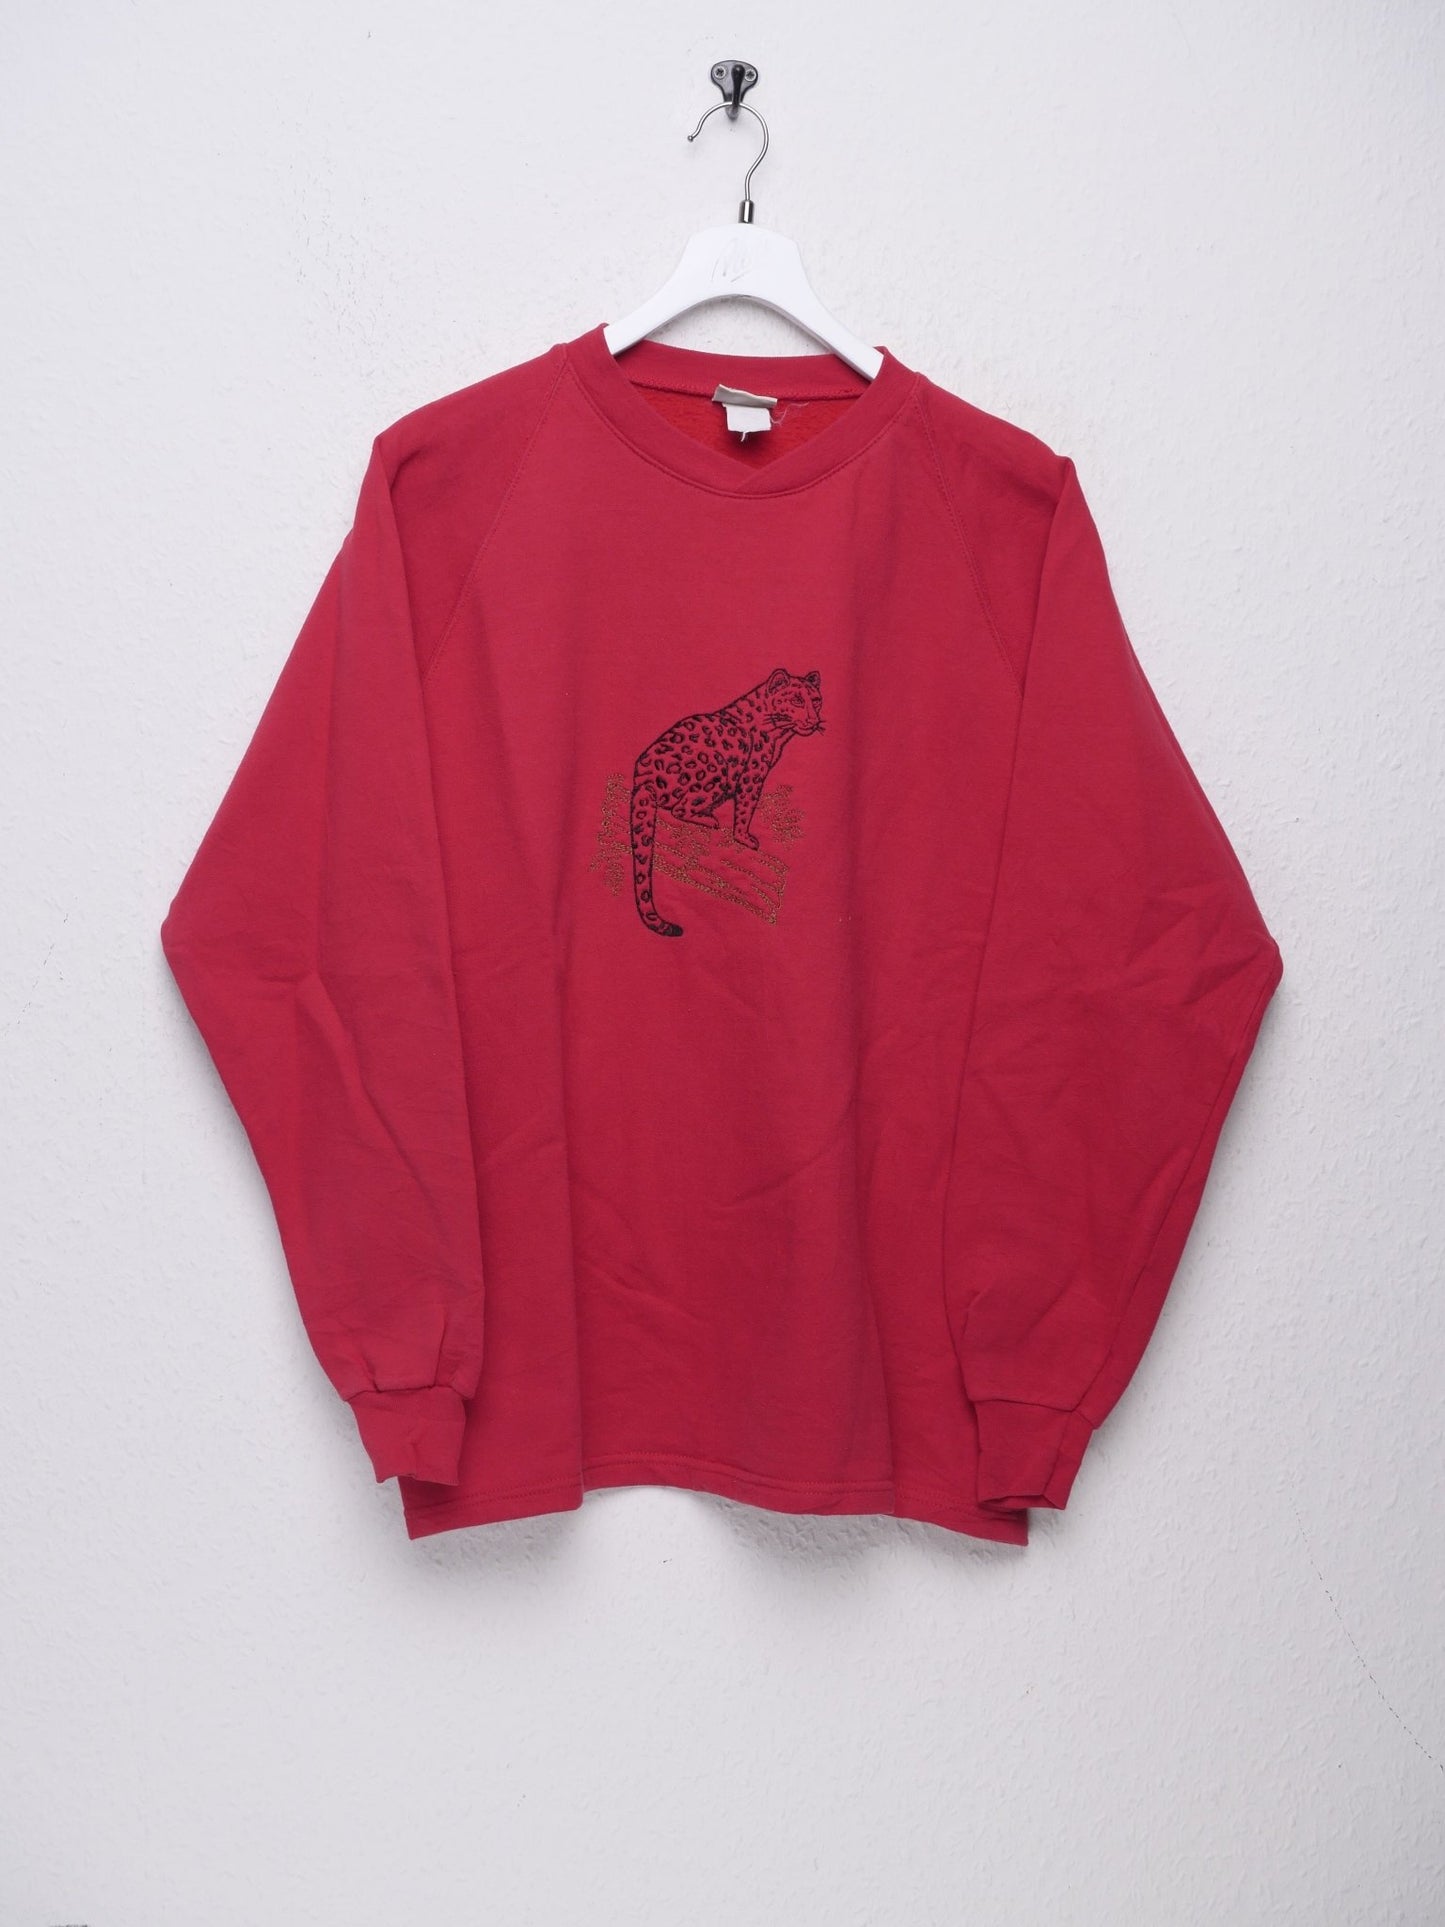 Lee embroidered Graphic red Sweater - Peeces